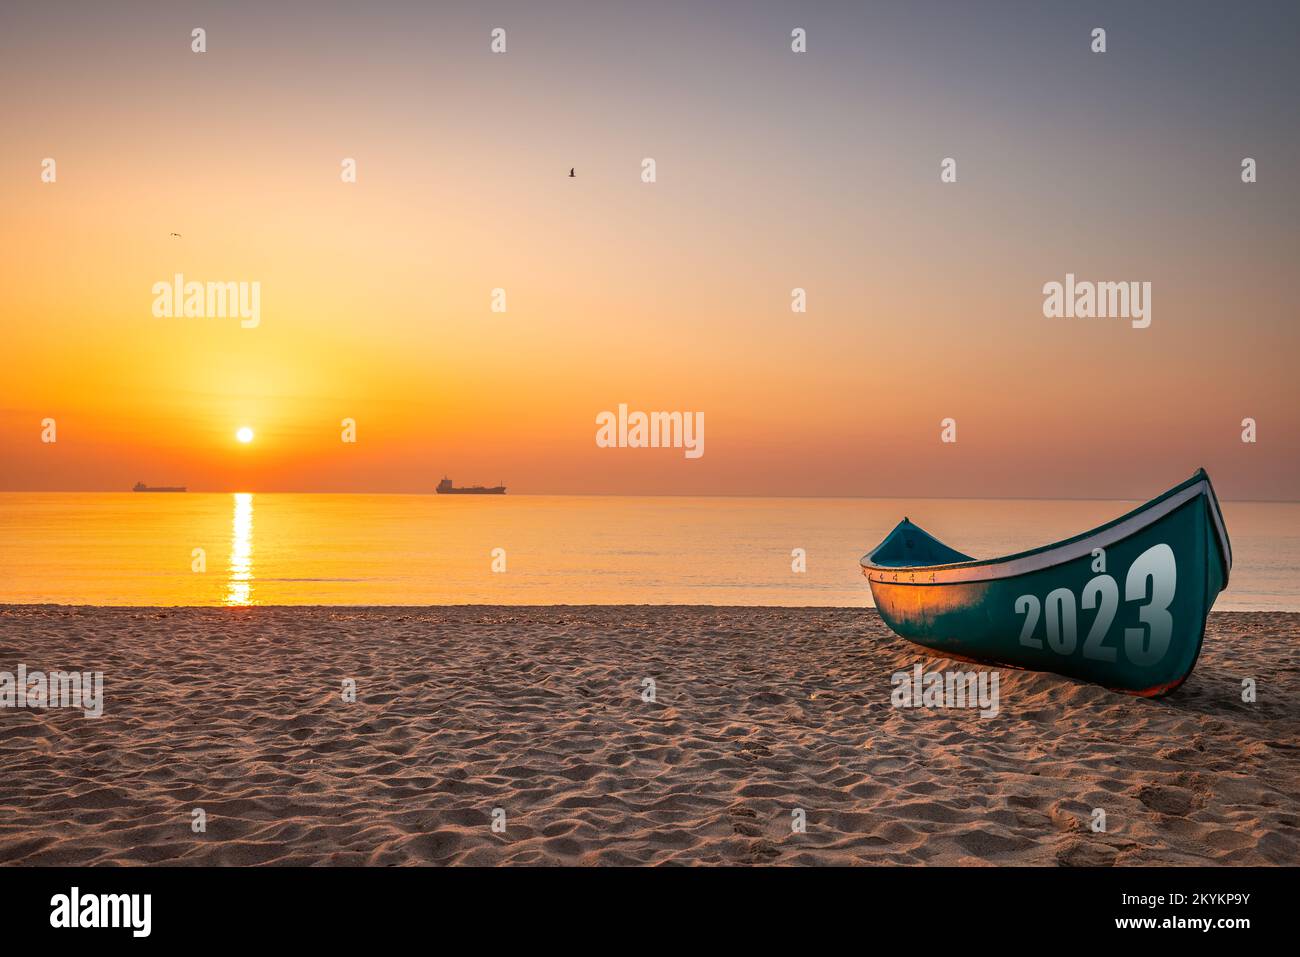 Happy new year 2023 relaxation morning on the beach concept. Fishing Boat and beautiful new sunrise or sunset on the seashore. Stock Photo